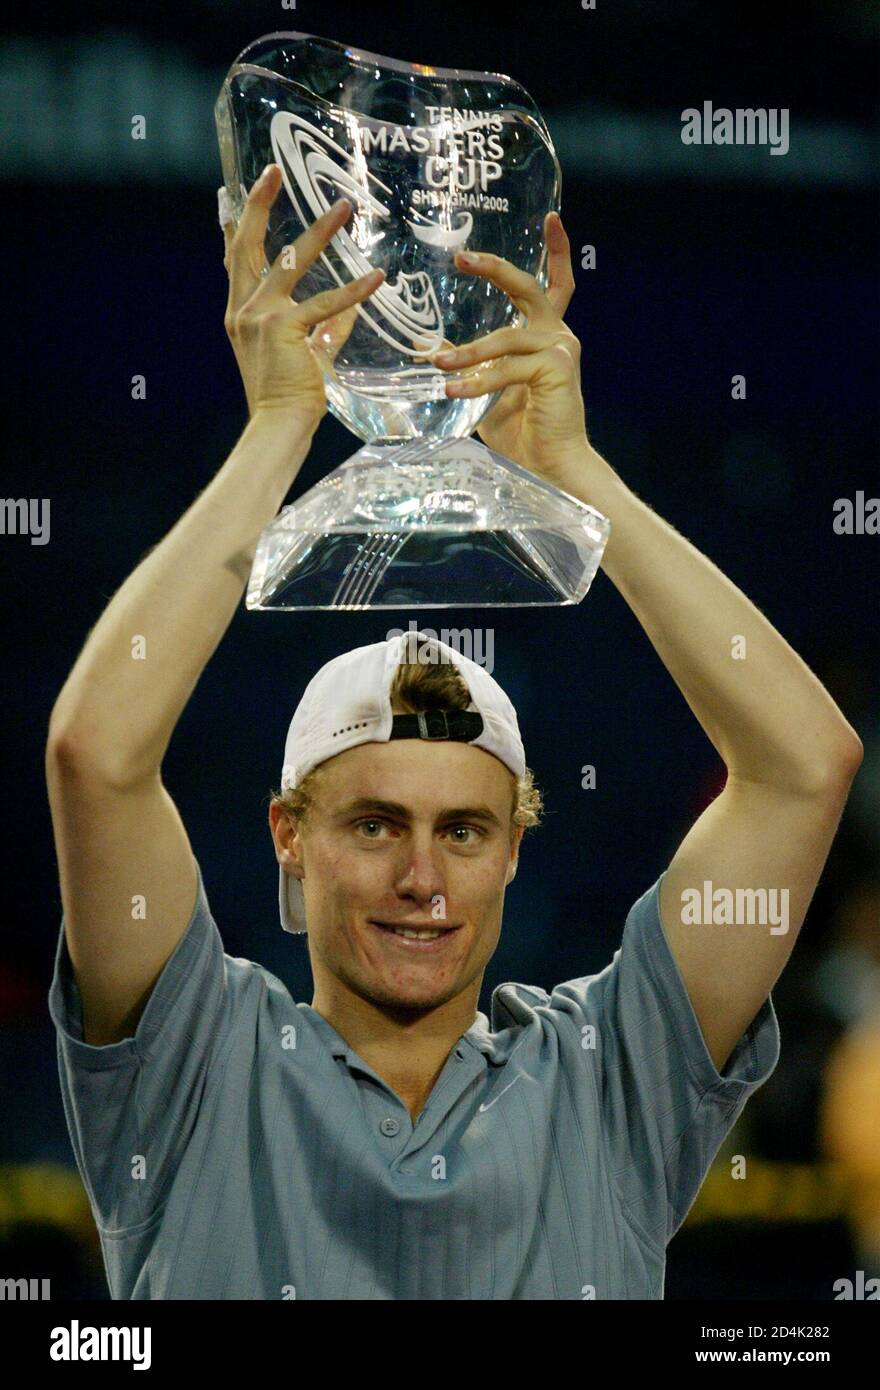 World number one Lleyton Hewitt of Australia holds aloft the trophy after  beating Juan Carlos Ferrero of Spain during the final of the Tennis Masters  Cup in Shanghai, China November 17, 2002.